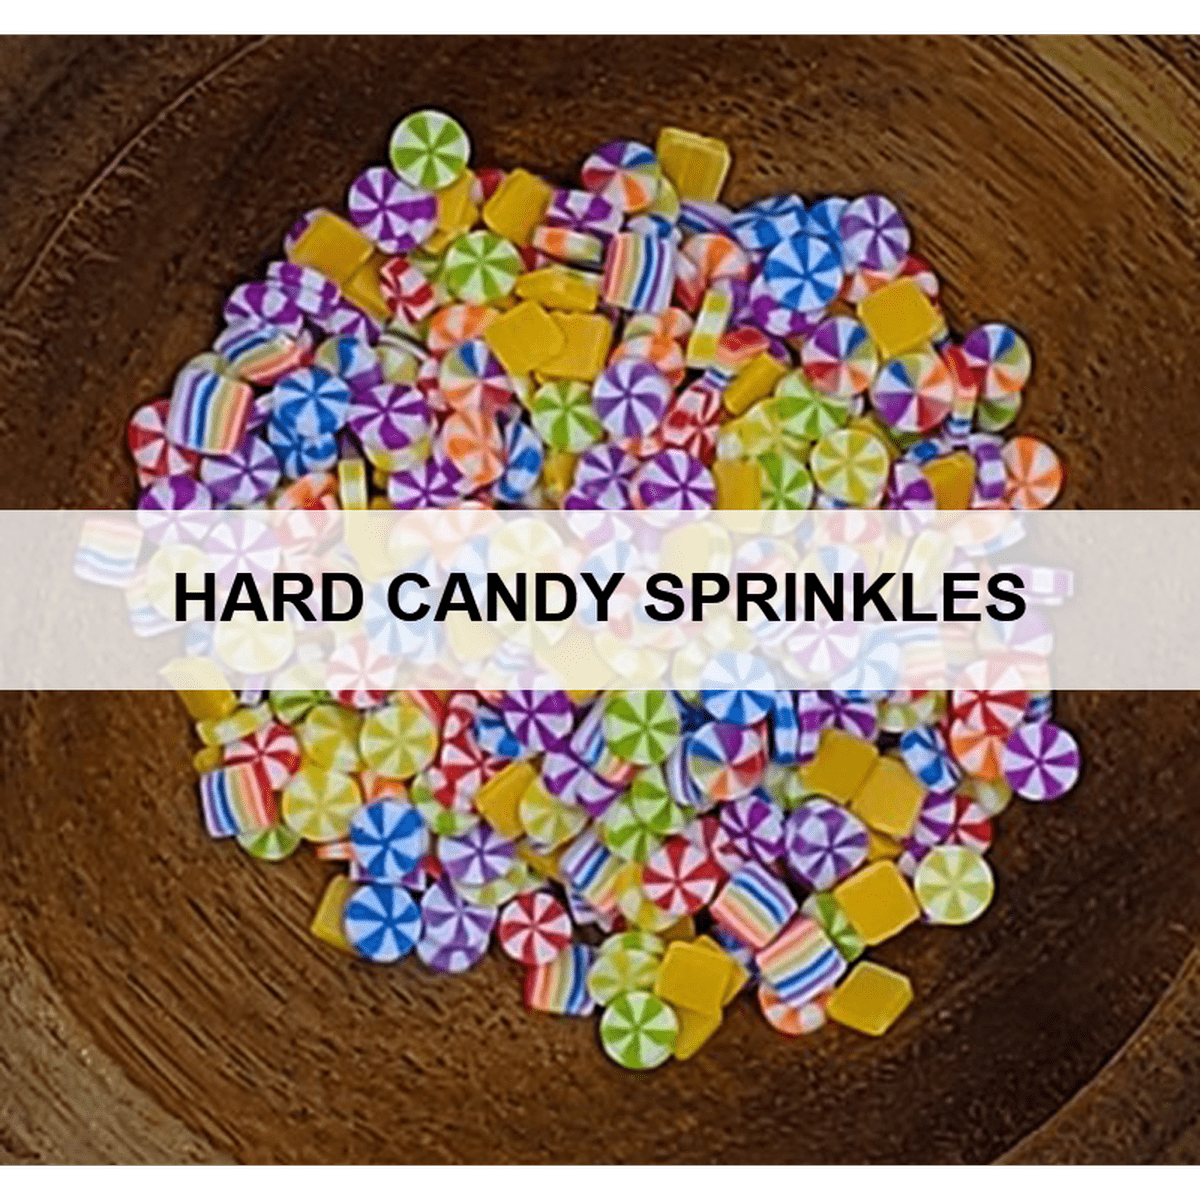 Hard Candy Sprinkles by Kat Scrappiness - Kat Scrappiness